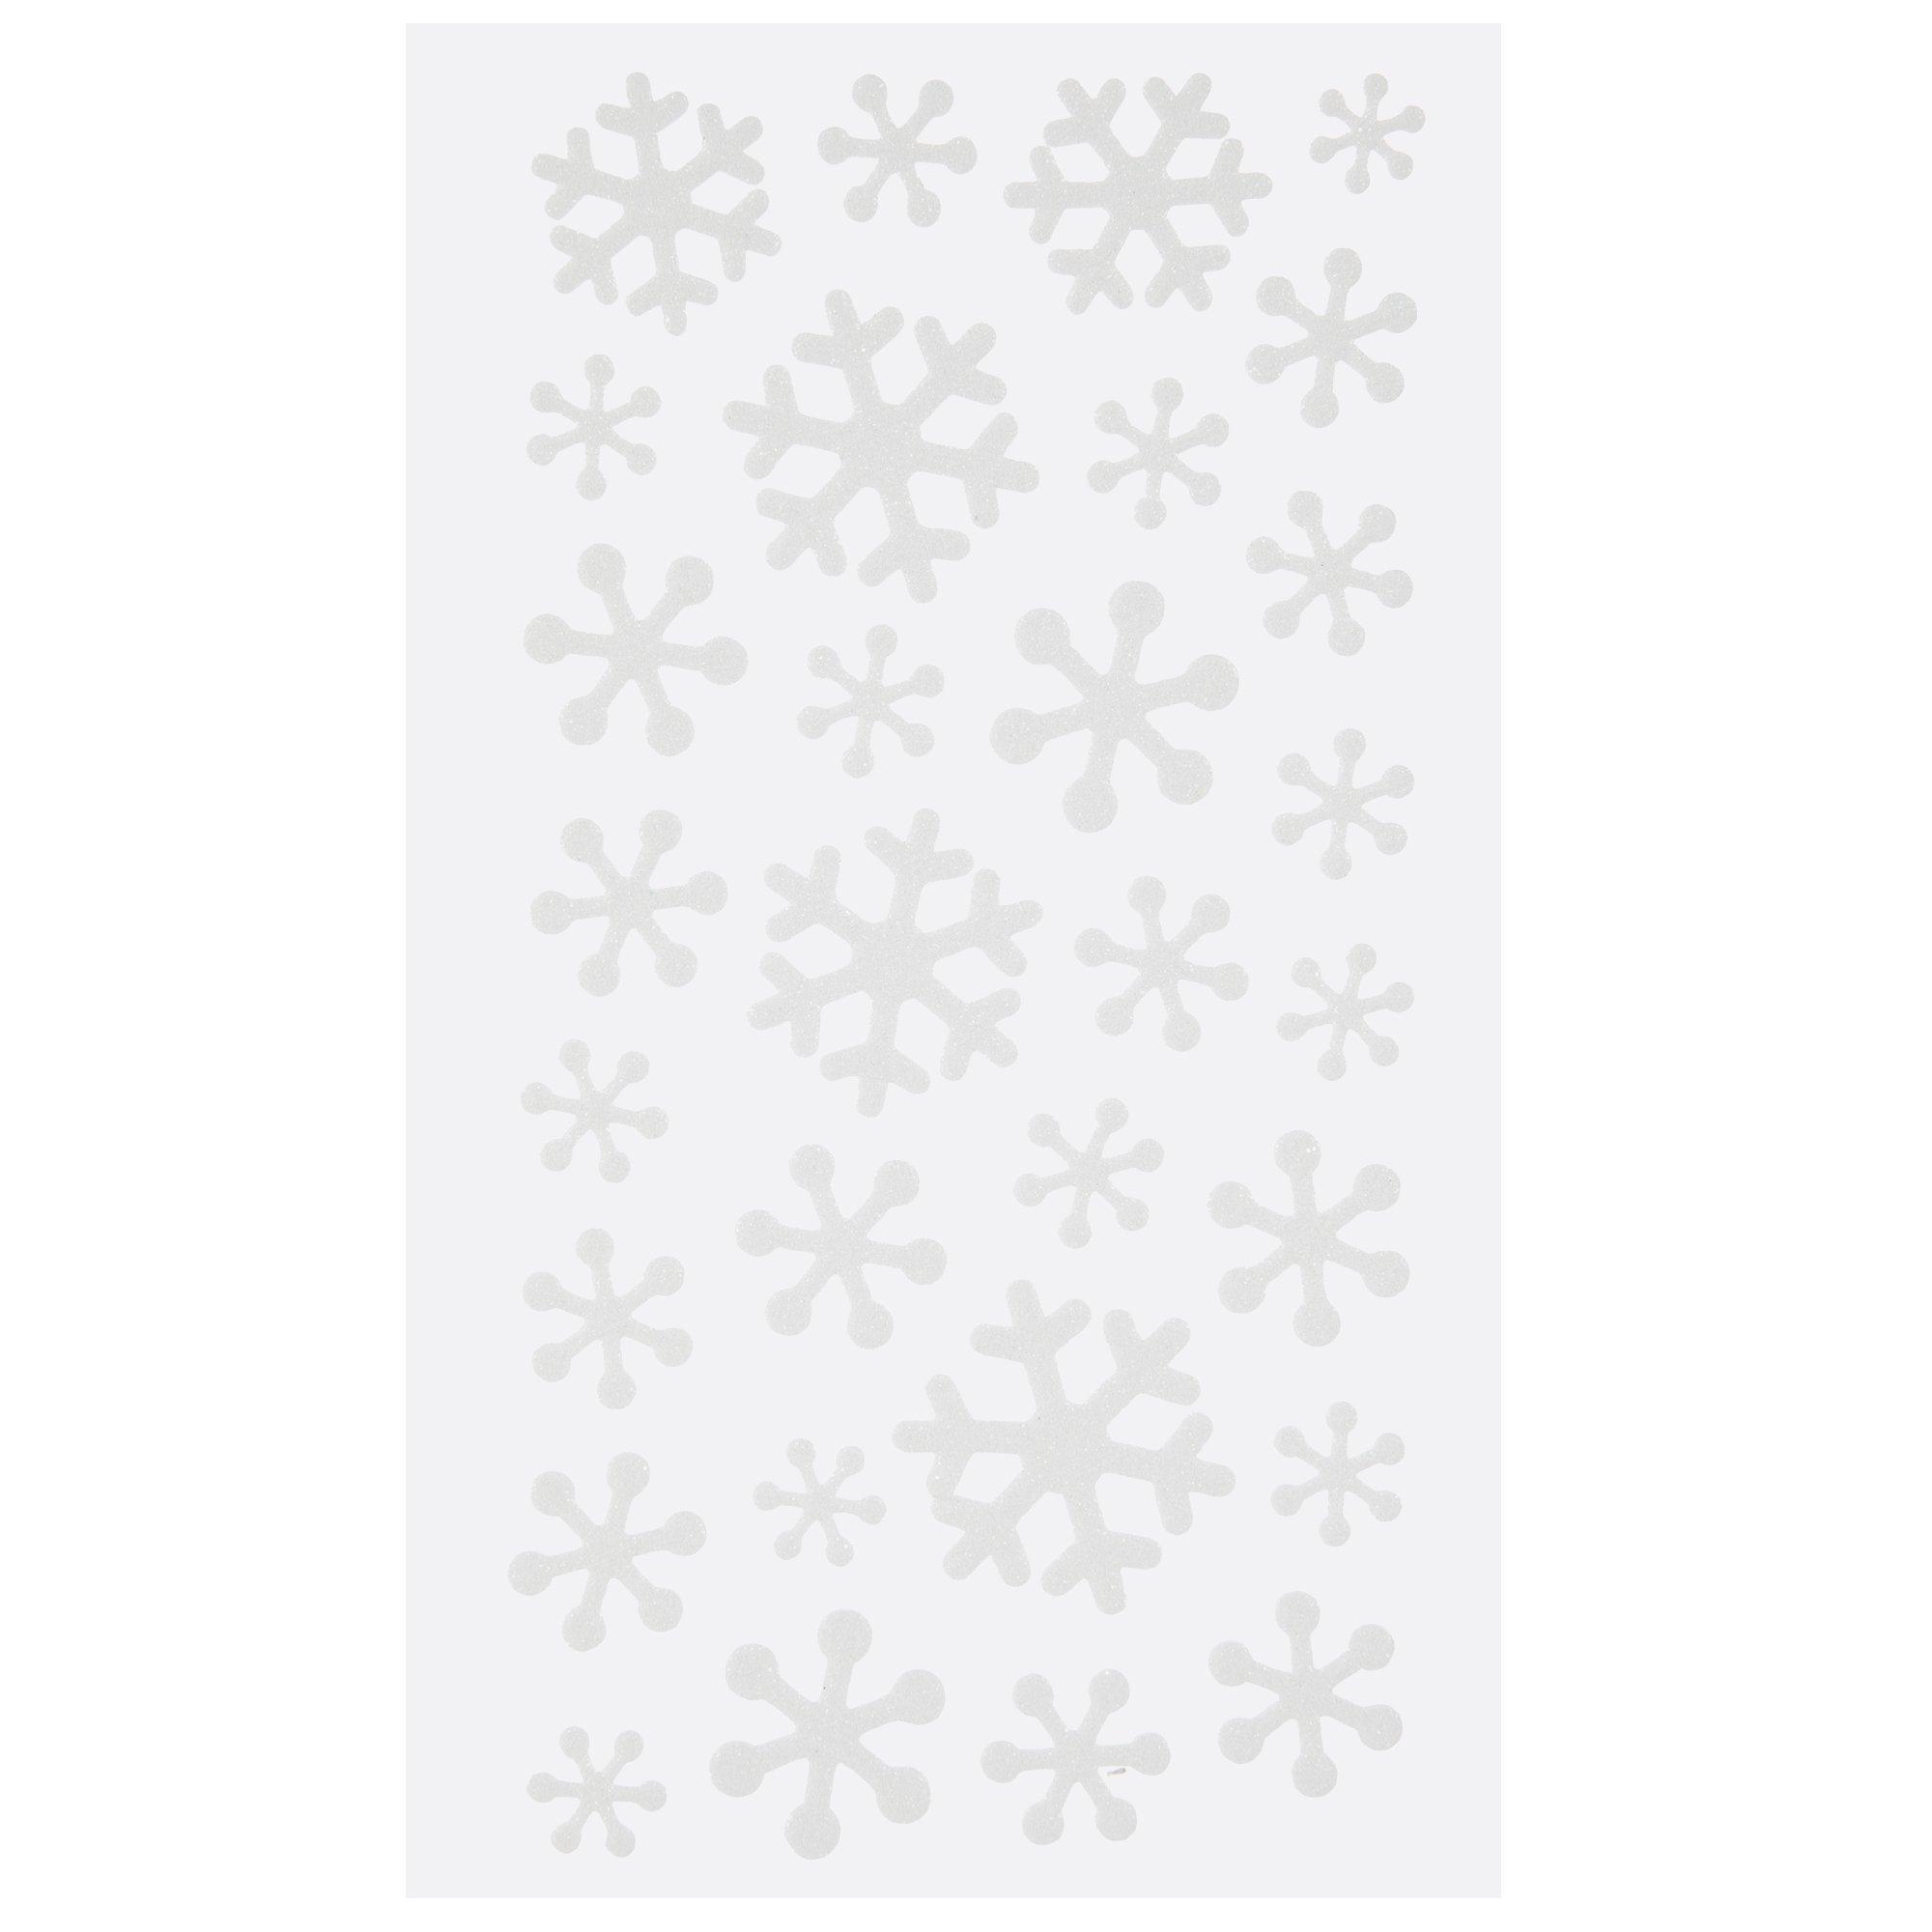 White Snowflake Sequin 15mm (5/8) ~ Snow White ~ Sequins for embroidery,  applique, arts, crafts, bridal wear and embellishment.